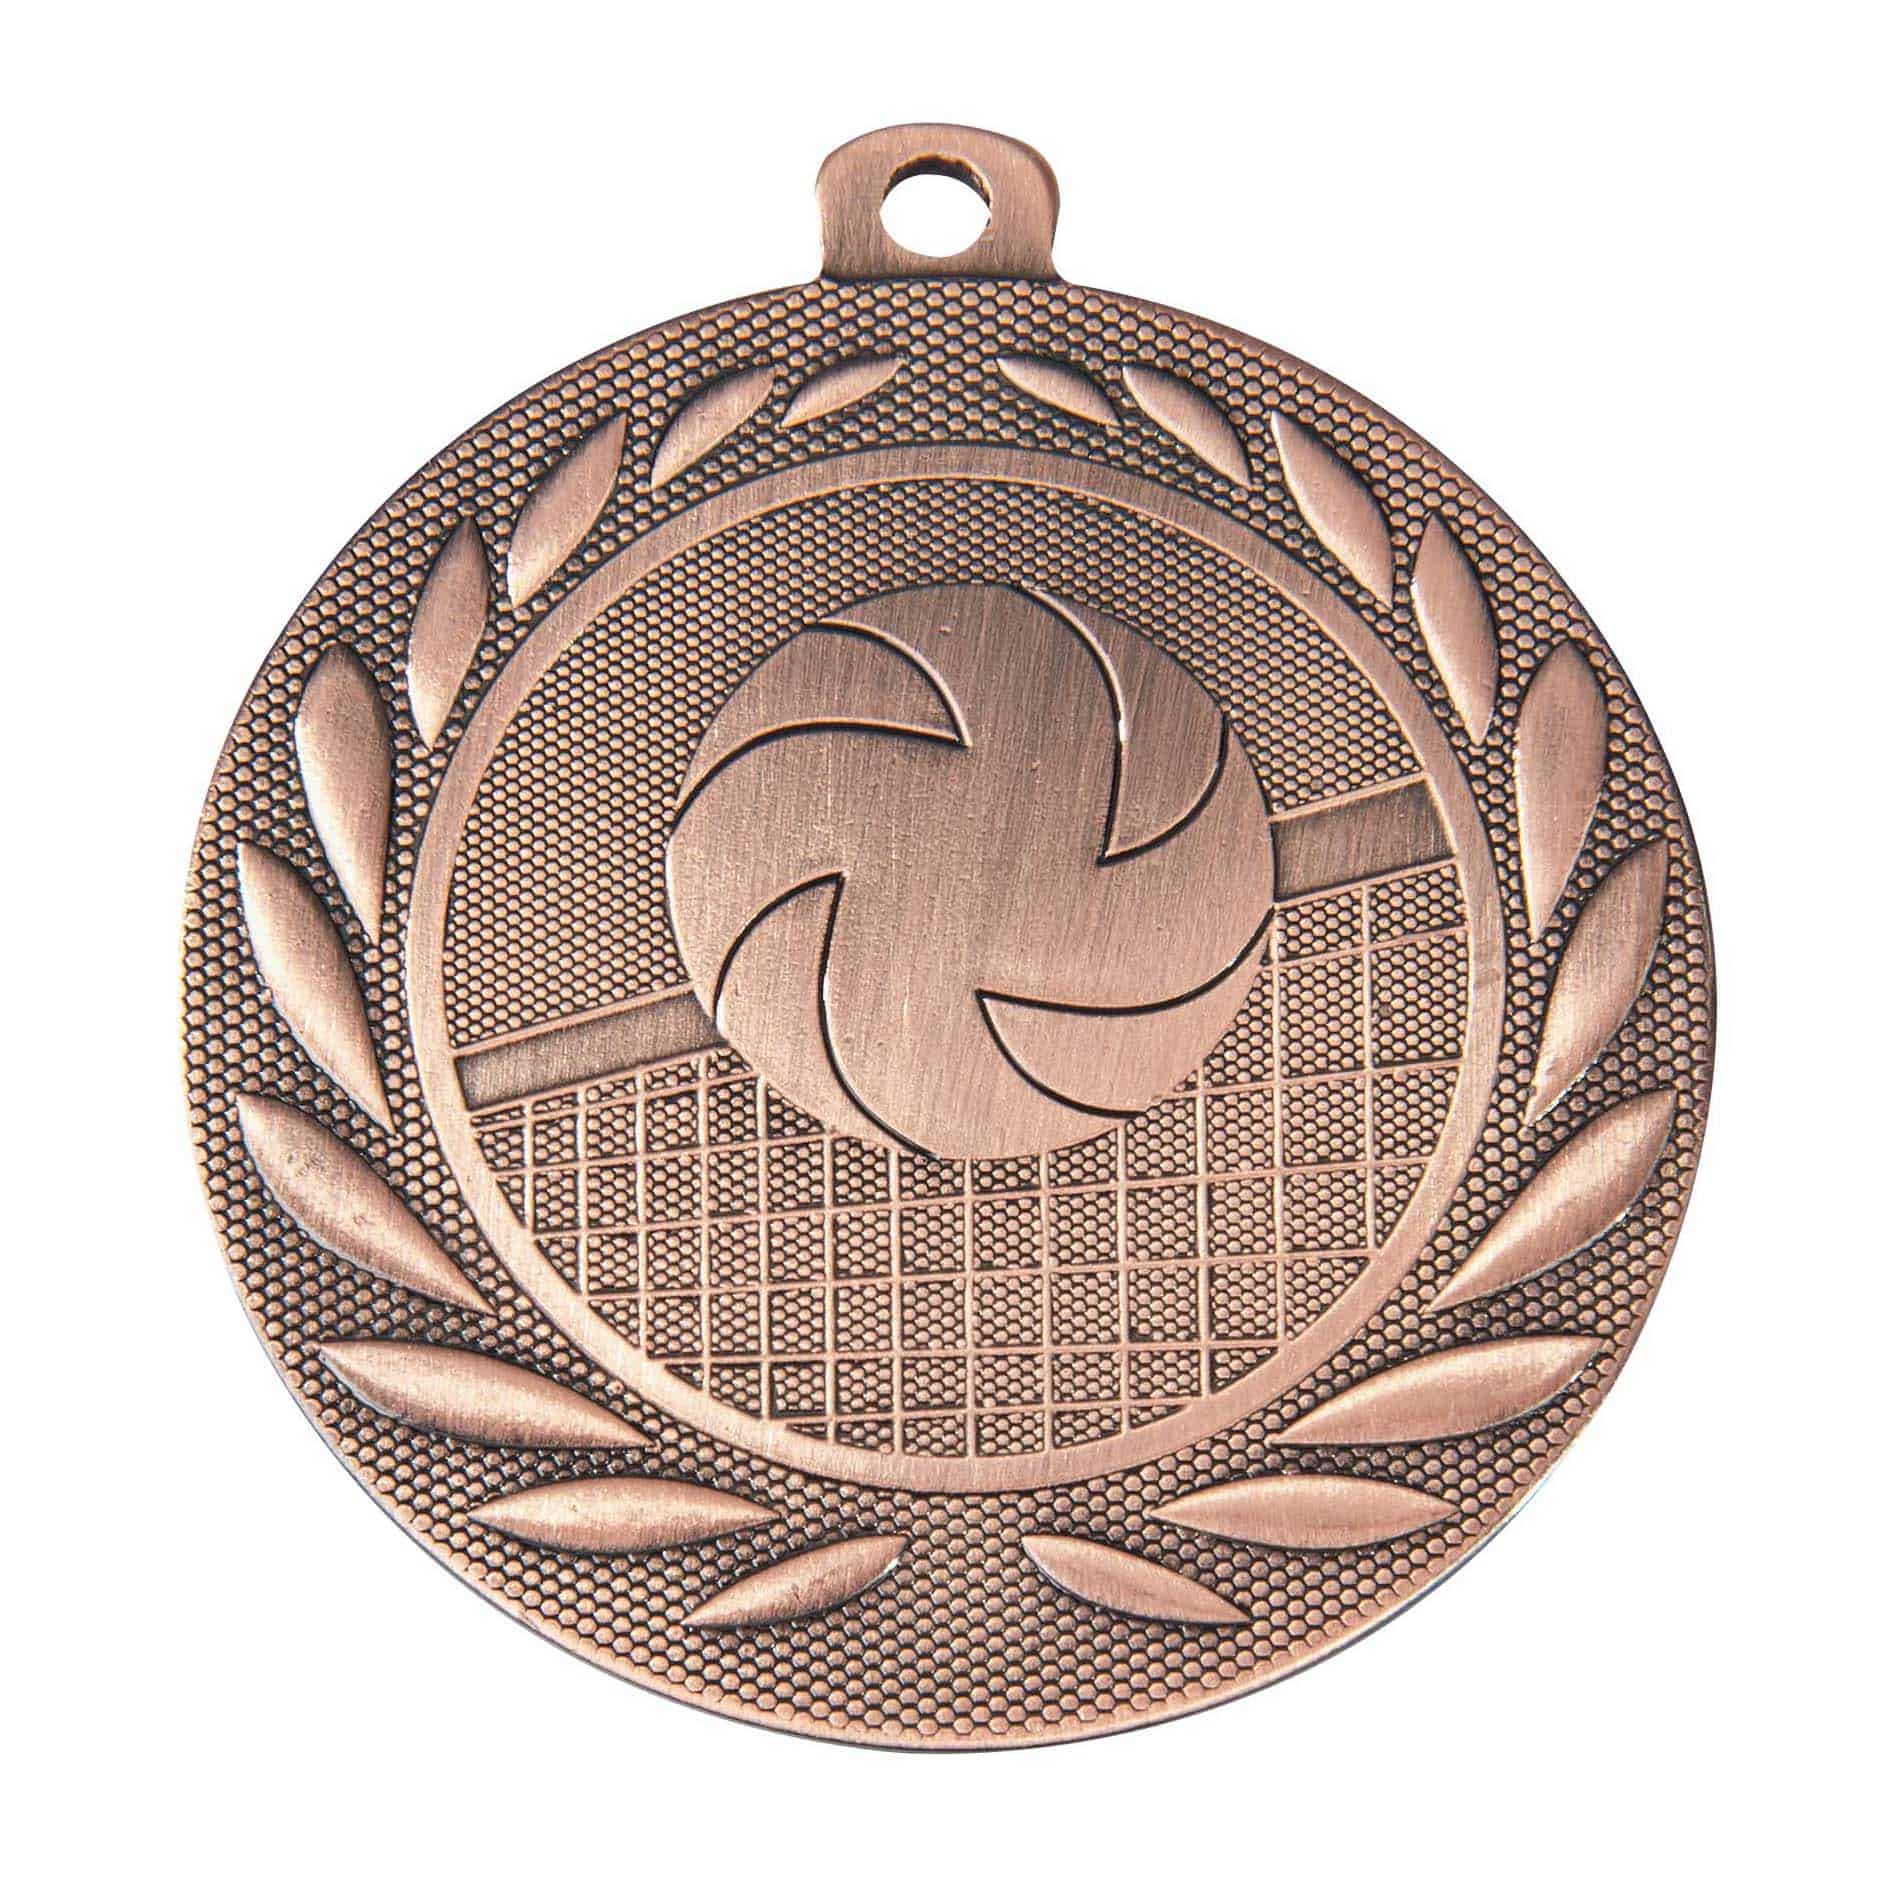 Medaille "Volleyball" Ø 50mm mit Band